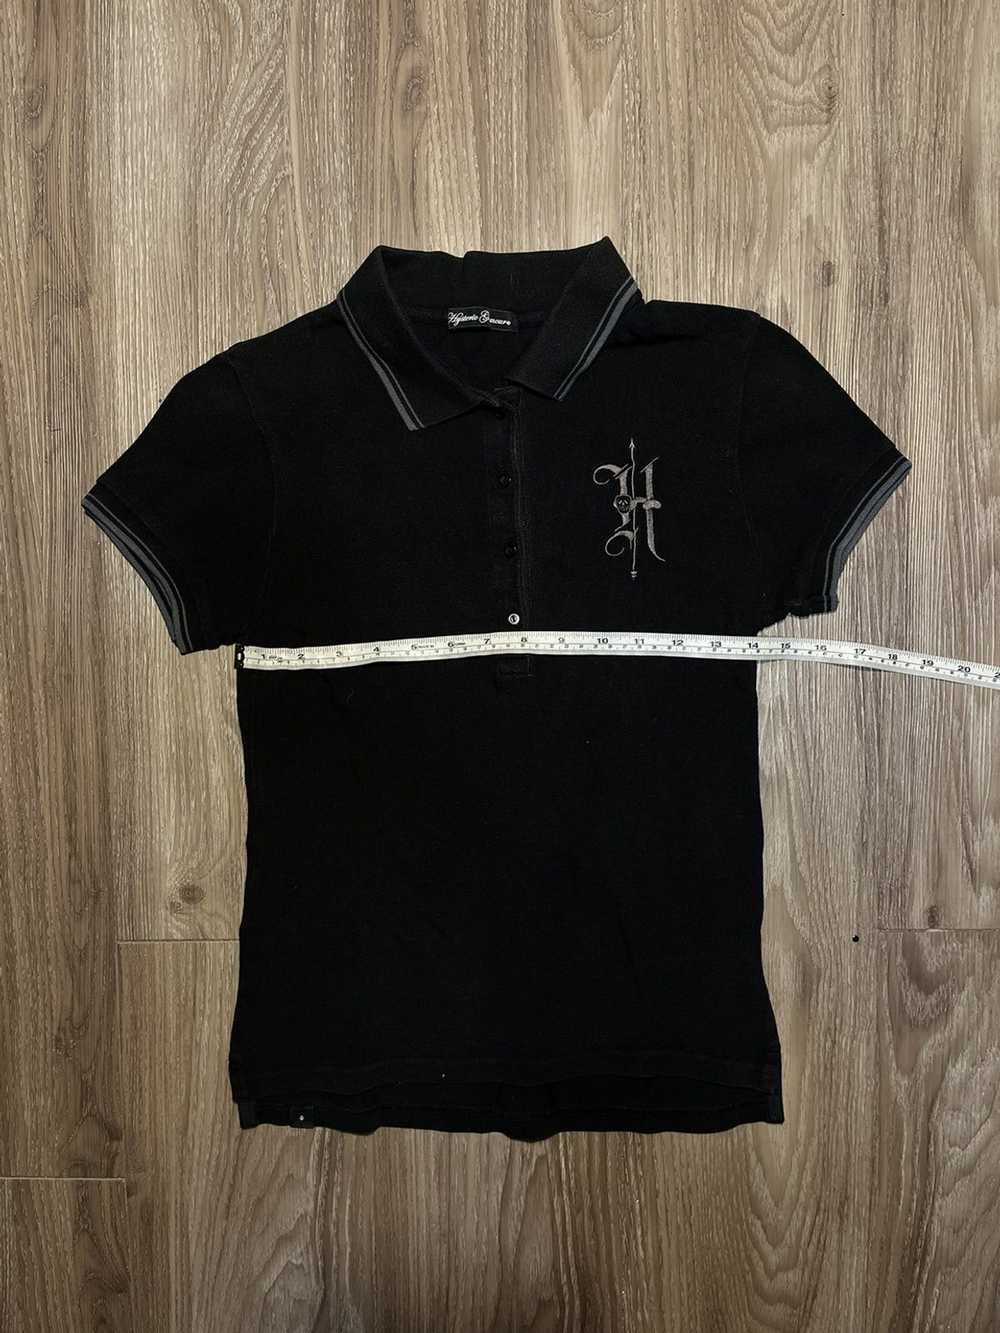 Hysteric Glamour Hysteric glamour polo - image 1